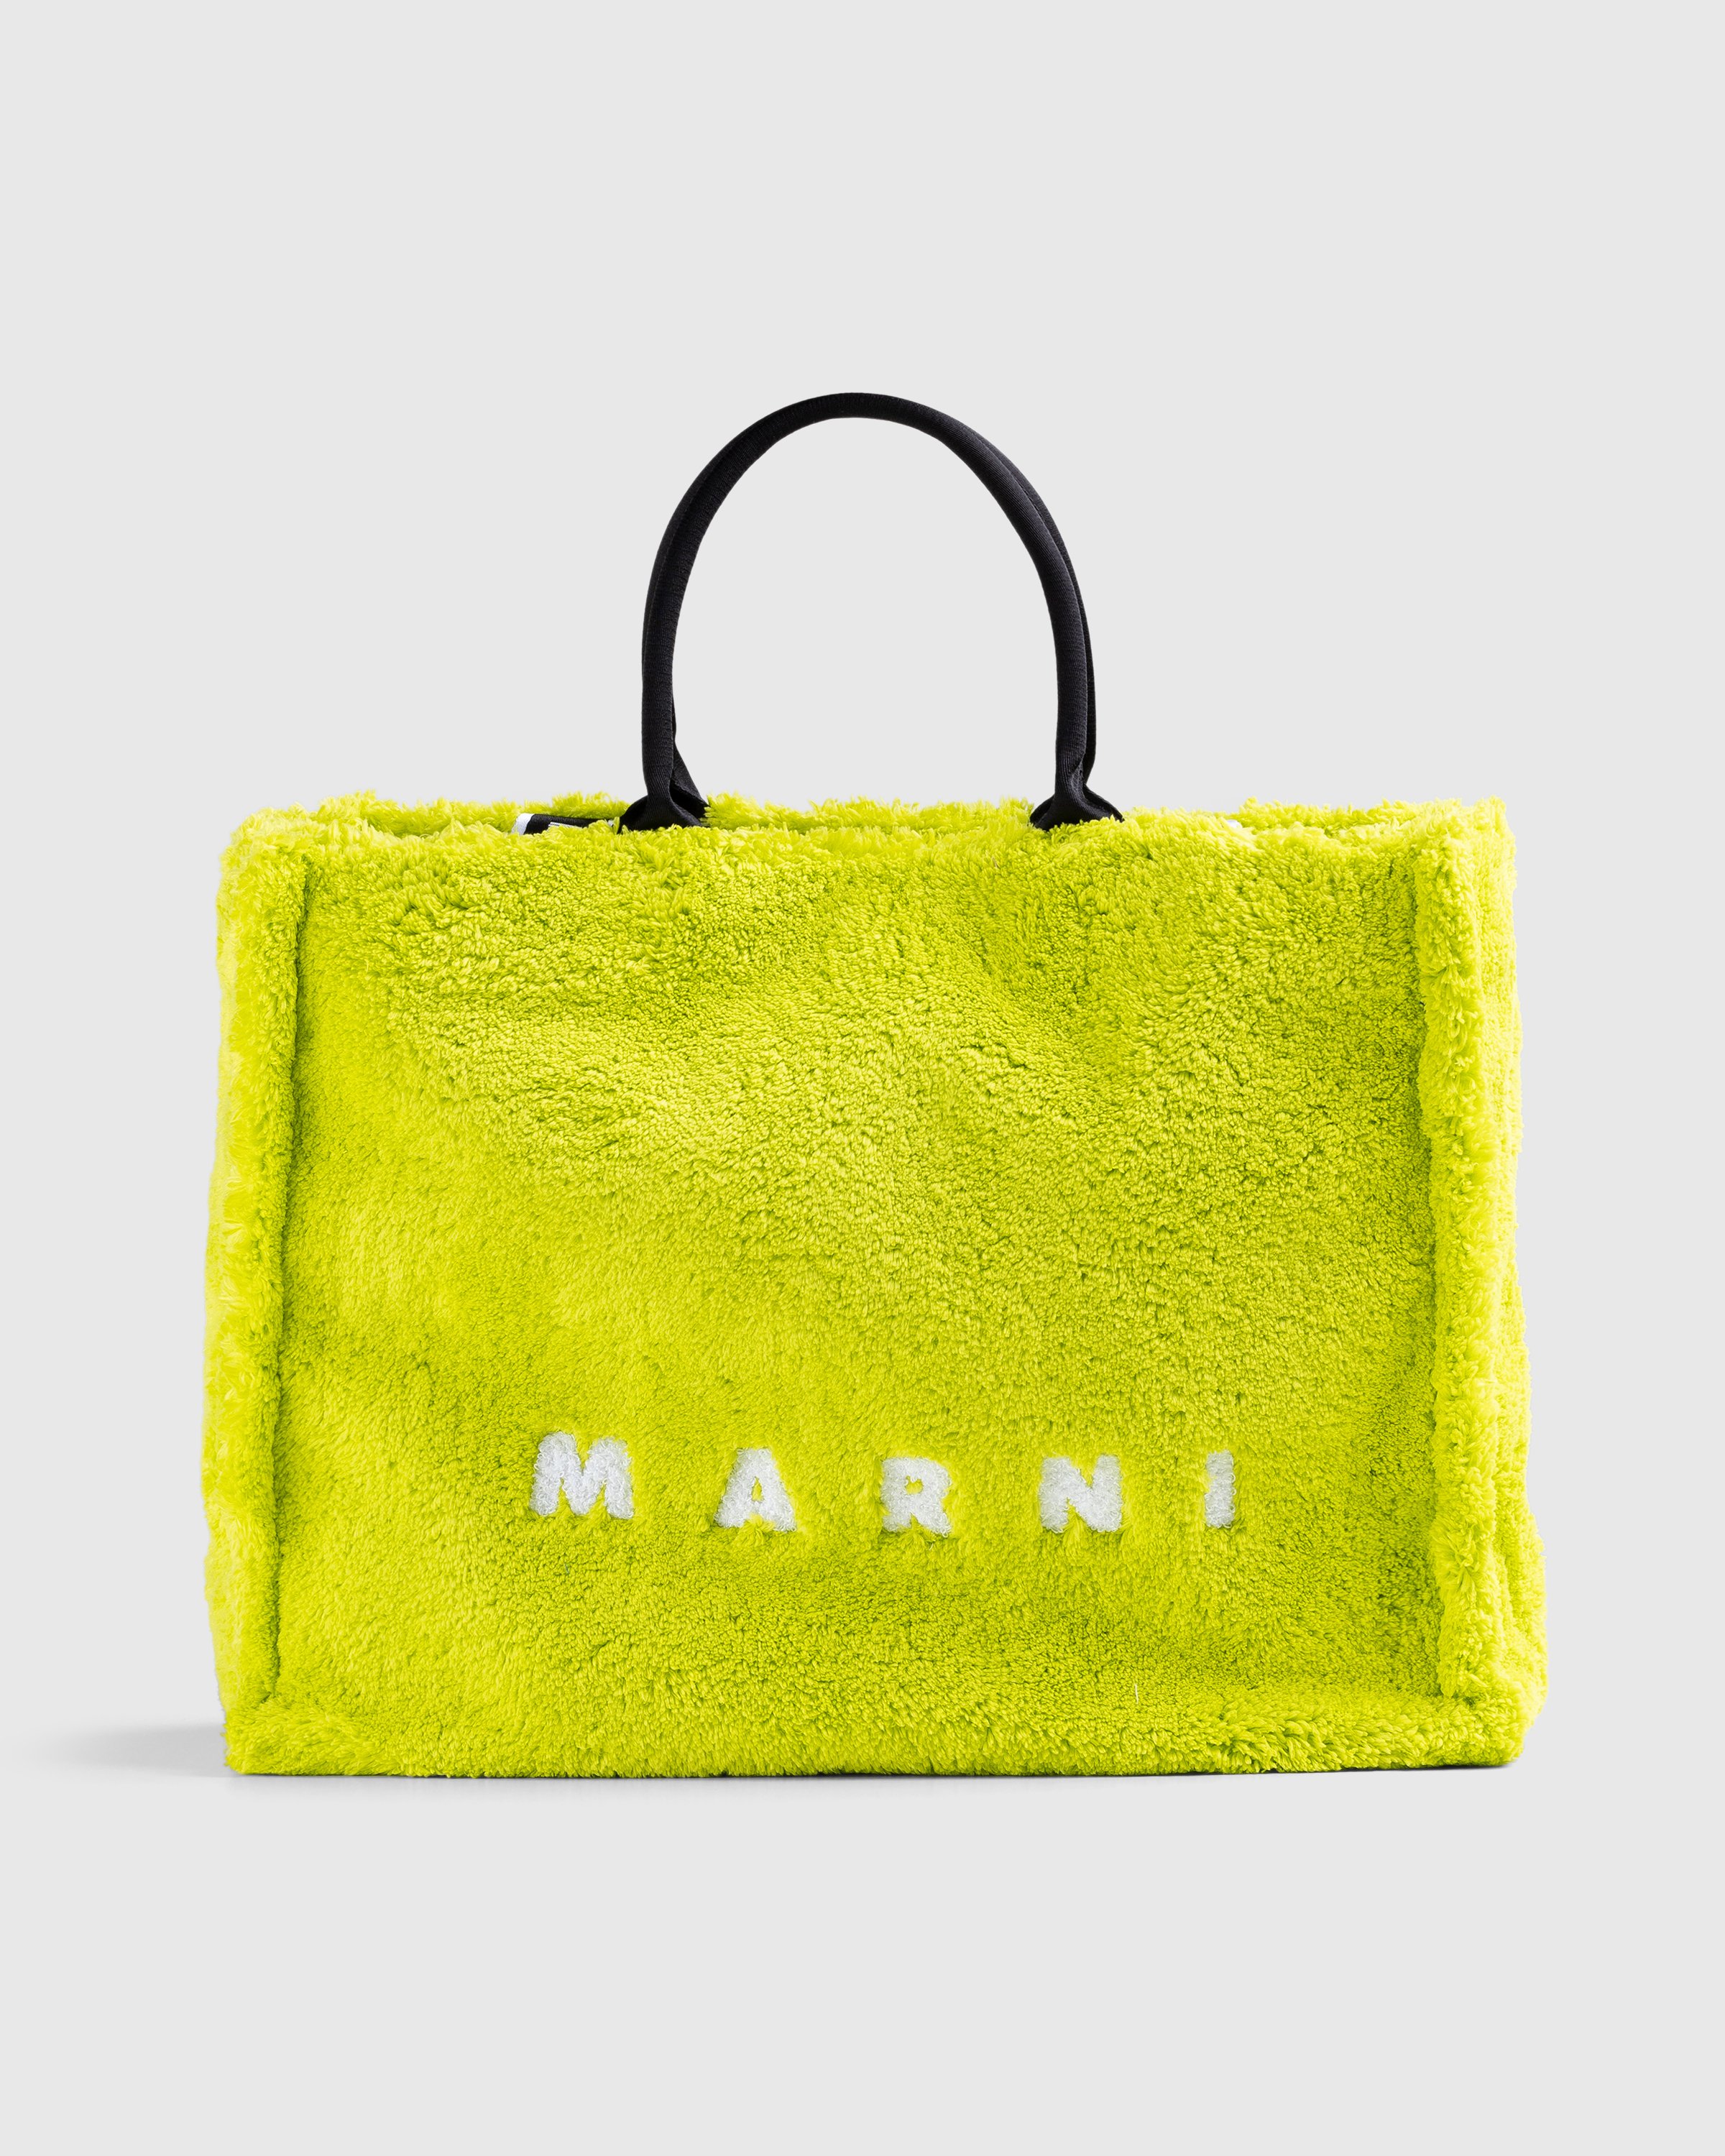 Marni - Terry Cloth Tote Bag Light Lime - Accessories - Green - Image 1